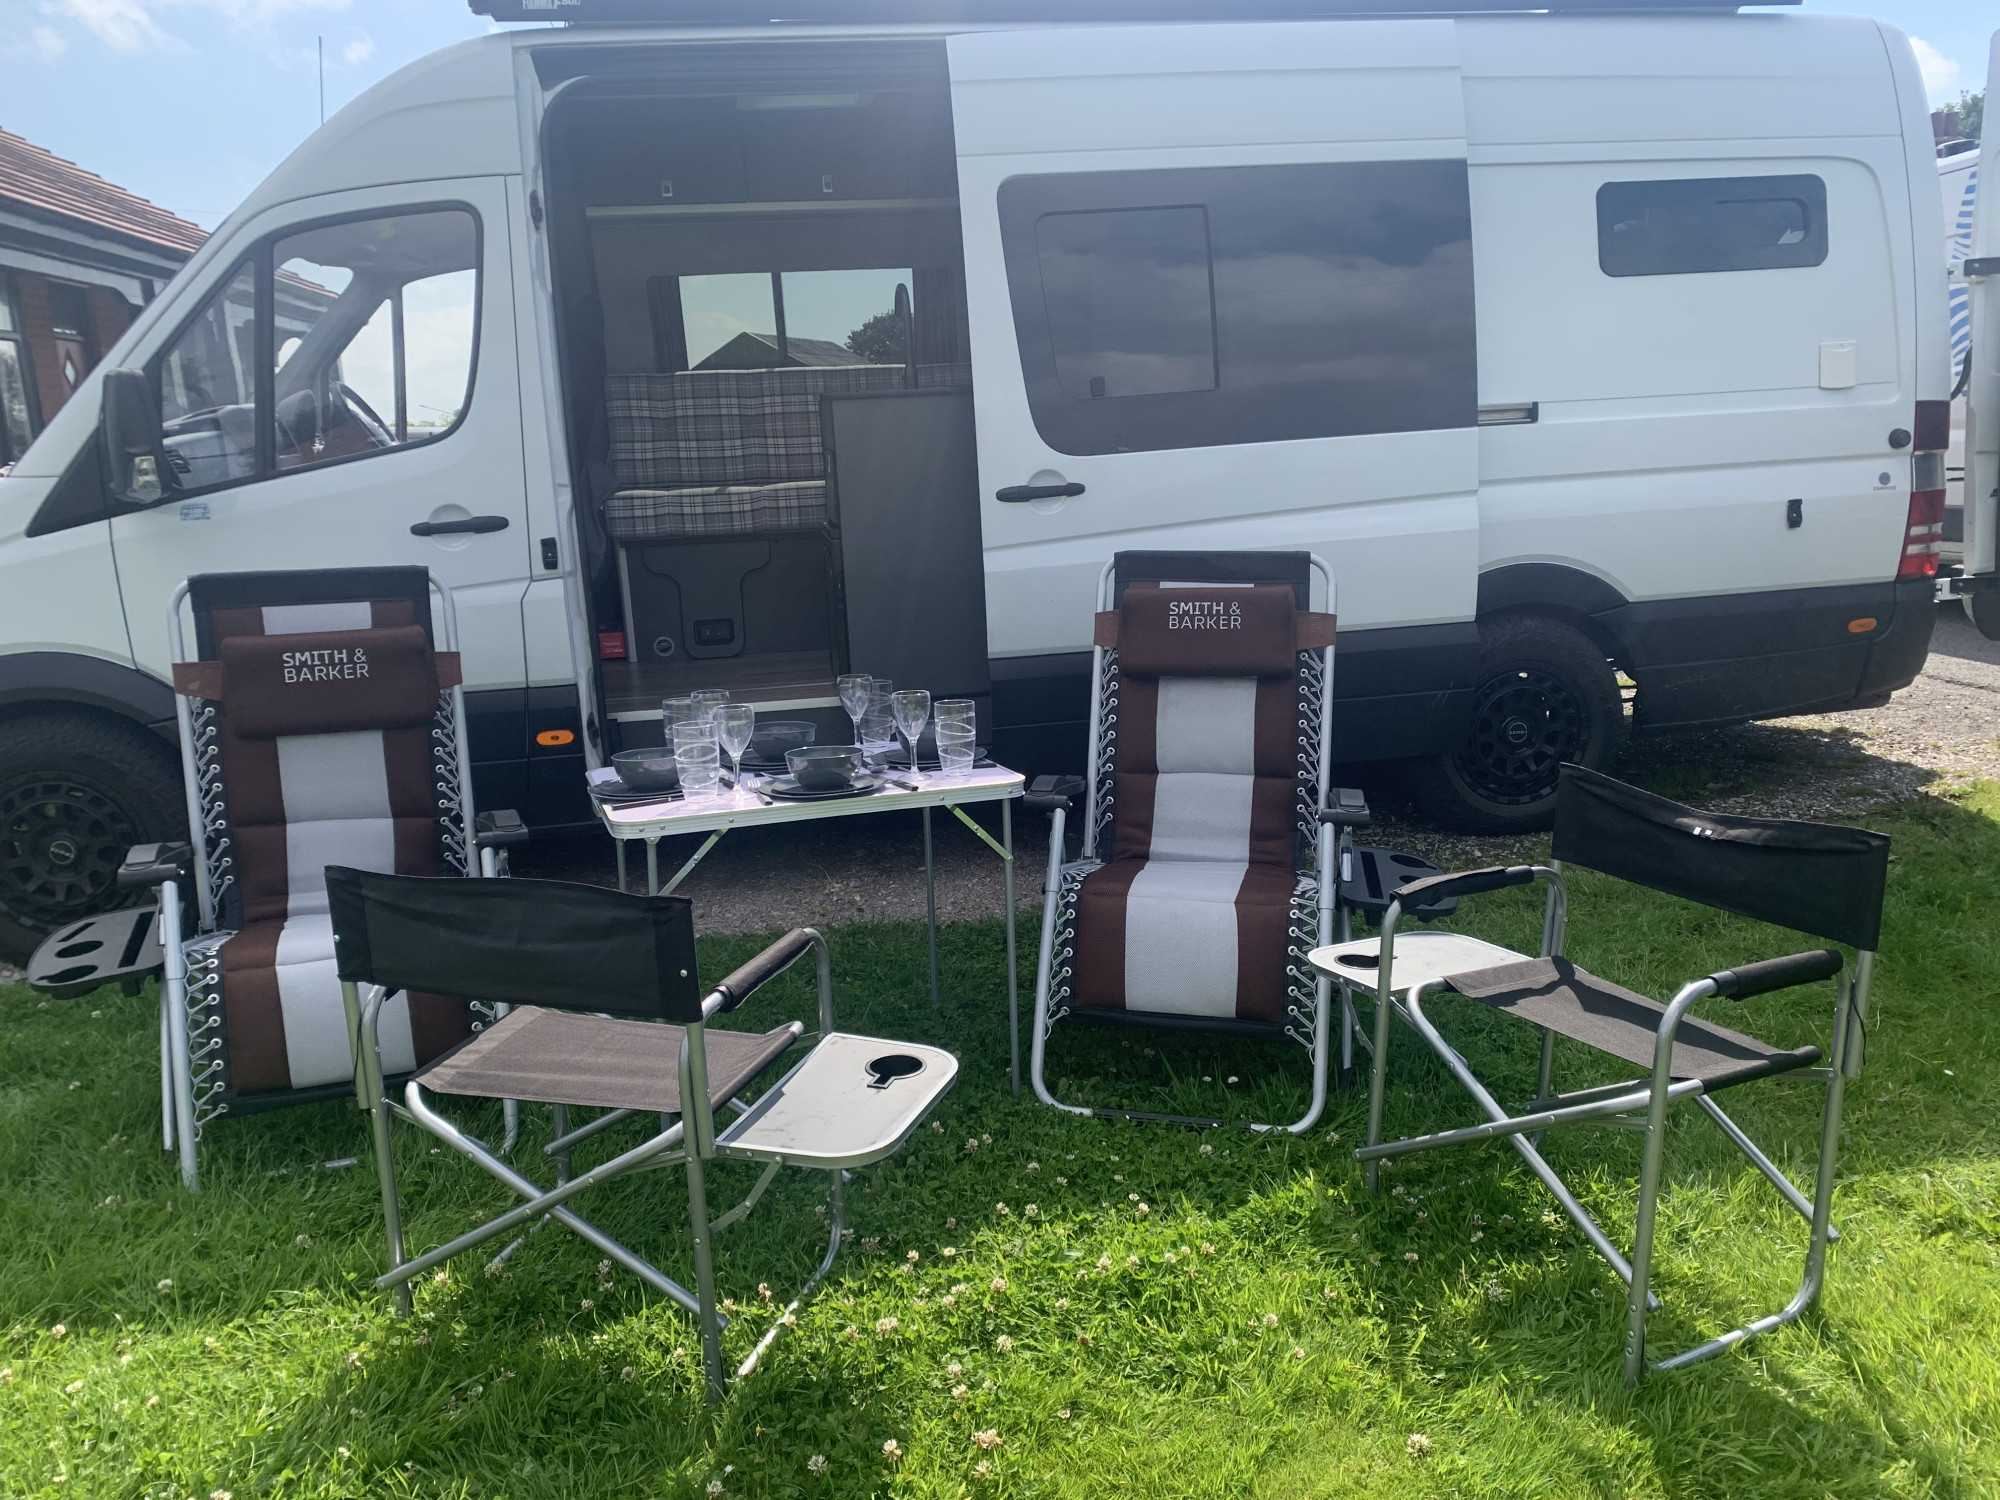 A Mercedes Sprinter Campervan called Apache and for hire in Lancashire, England